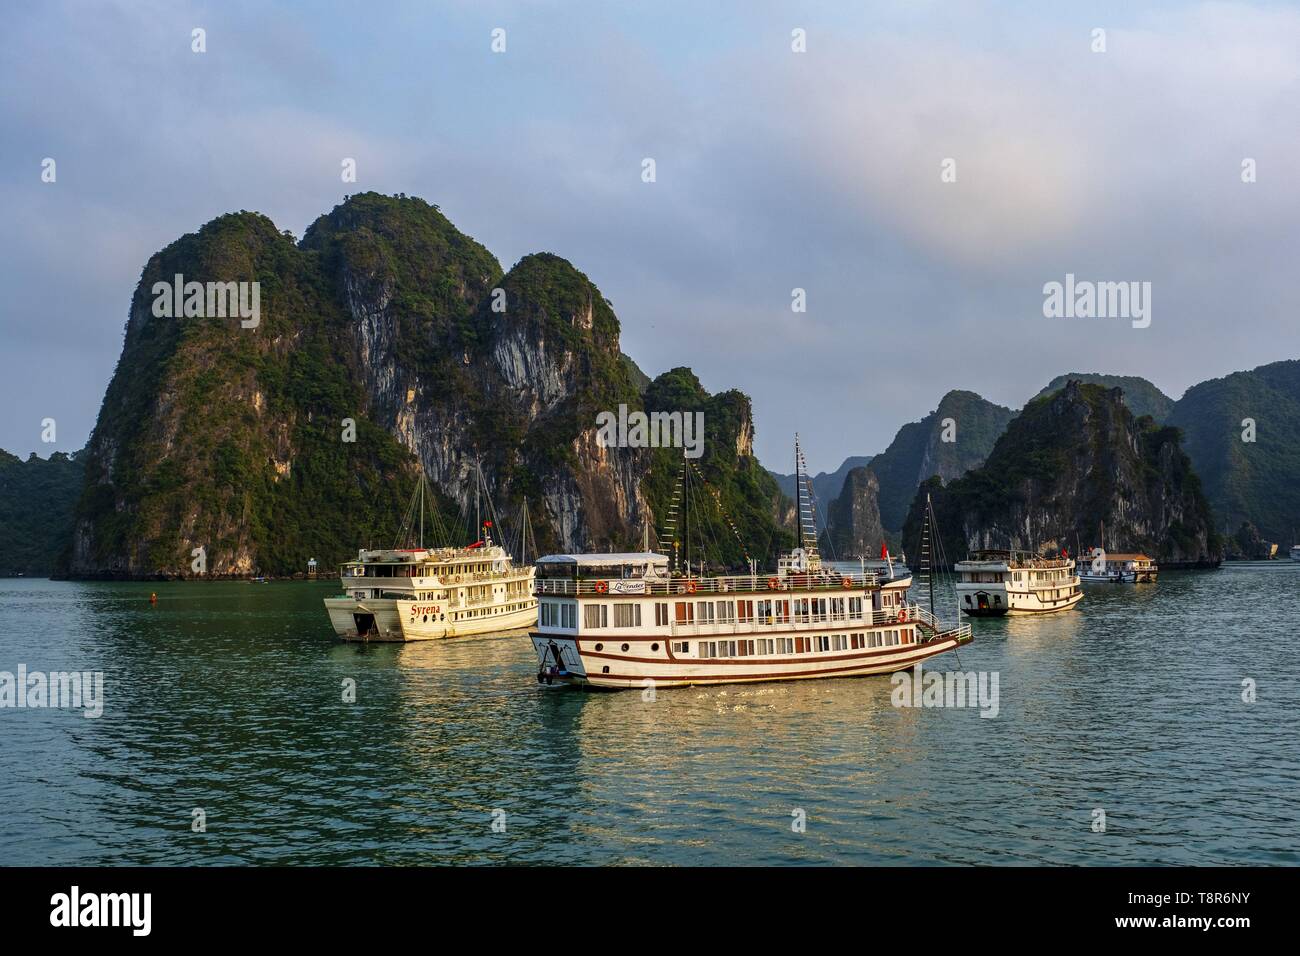 Vietnam, Gulf of Tonkin, Quang Ninh province, Ha Long Bay (Vinh Ha Long) listed as World Heritage by UNESCO (1994), iconic landscape of karst landforms, cruise ships Stock Photo